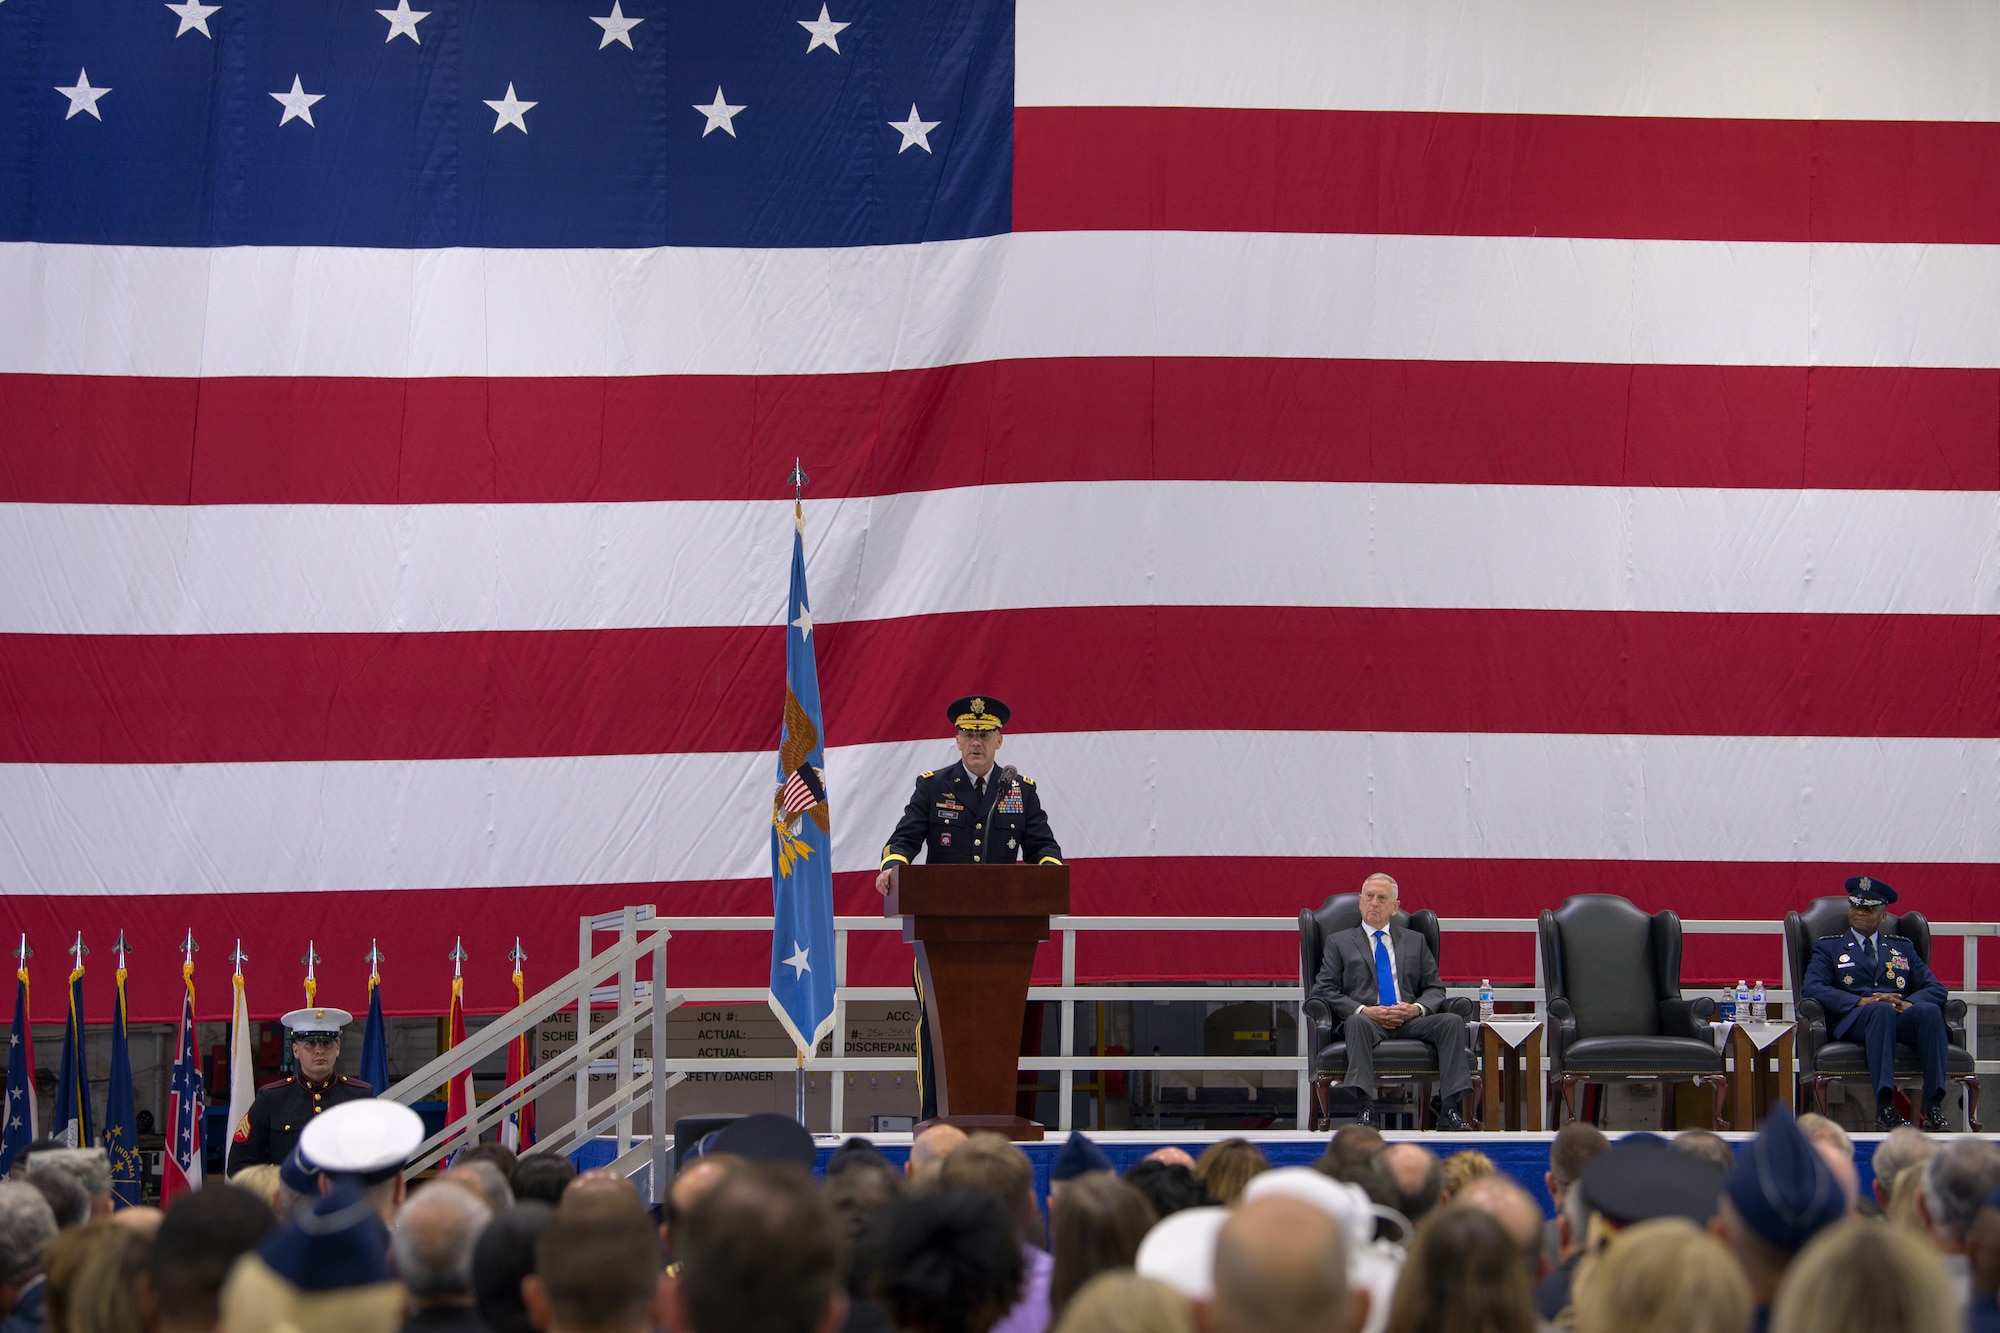 U.S. Army Gen. Stephen R. Lyons thanks family, distinguished guests and military members in his first address as commander of U.S. Transportation Command after a change of command ceremony, Aug. 24, 2018, at Scott Air Force Base, Illinois.